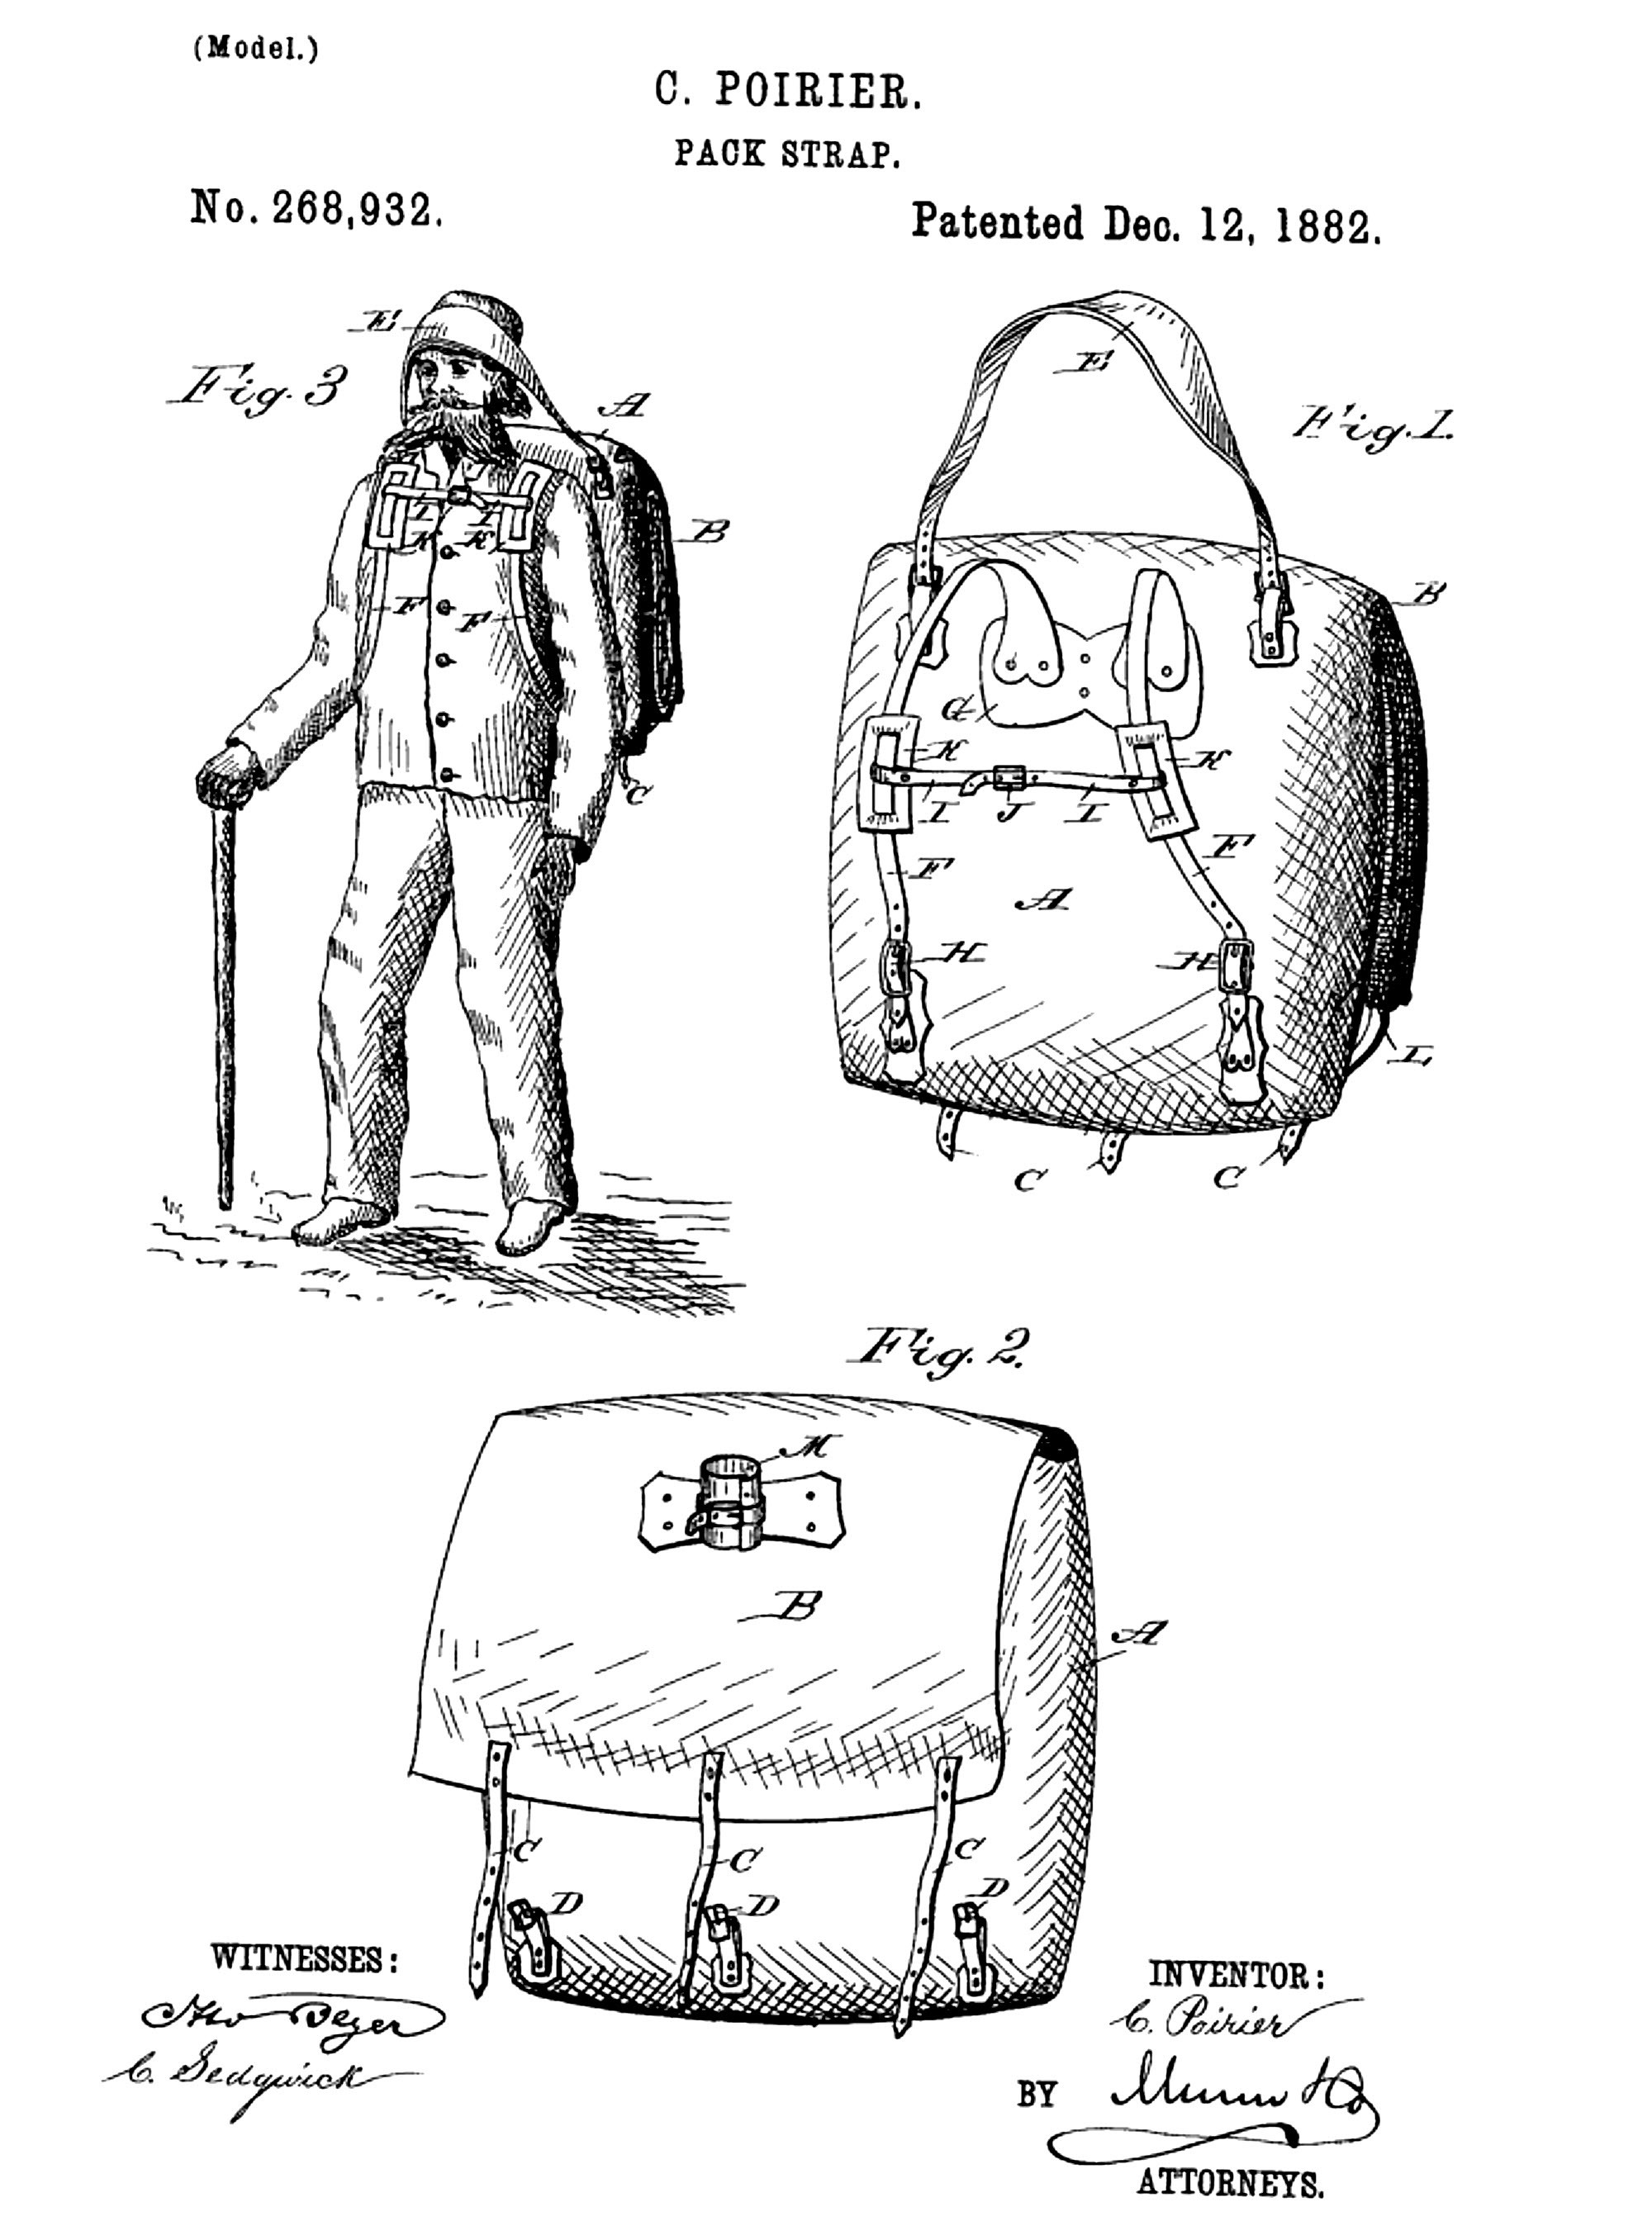 Camille Poirier's Duluth Pack patent drawing.